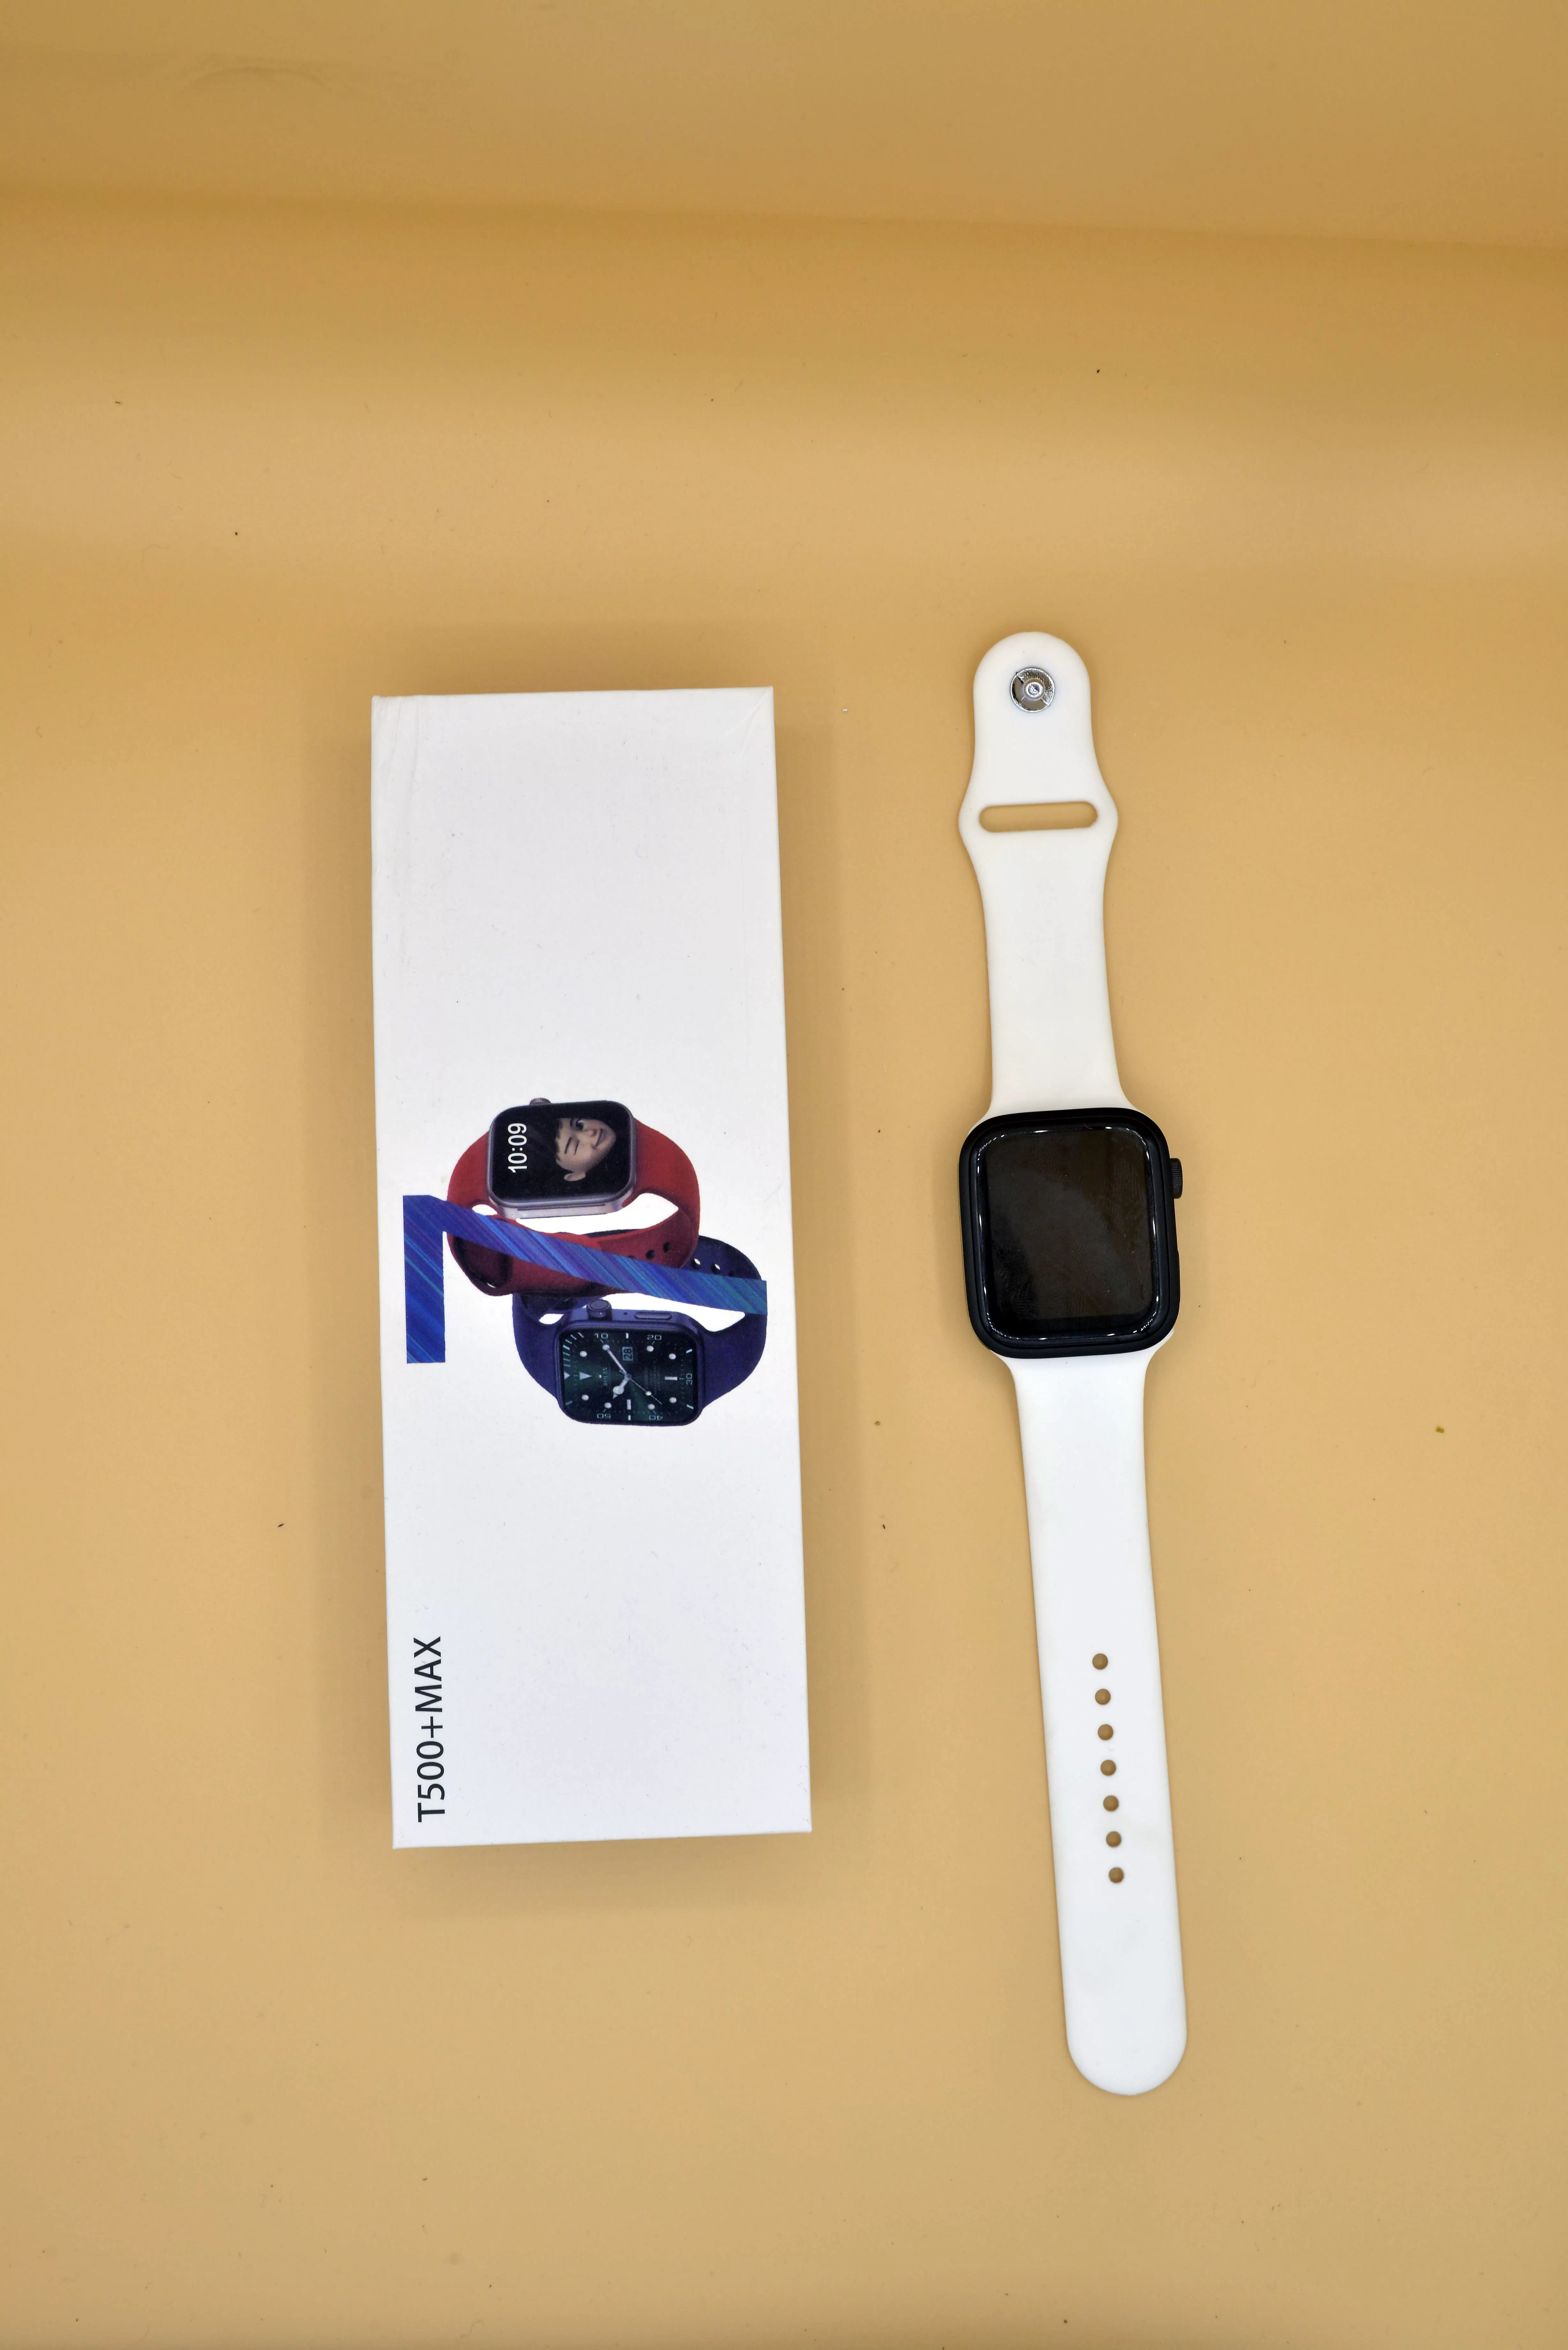 T500+ max Smartwatch Android & IOS Supported Bluetooth